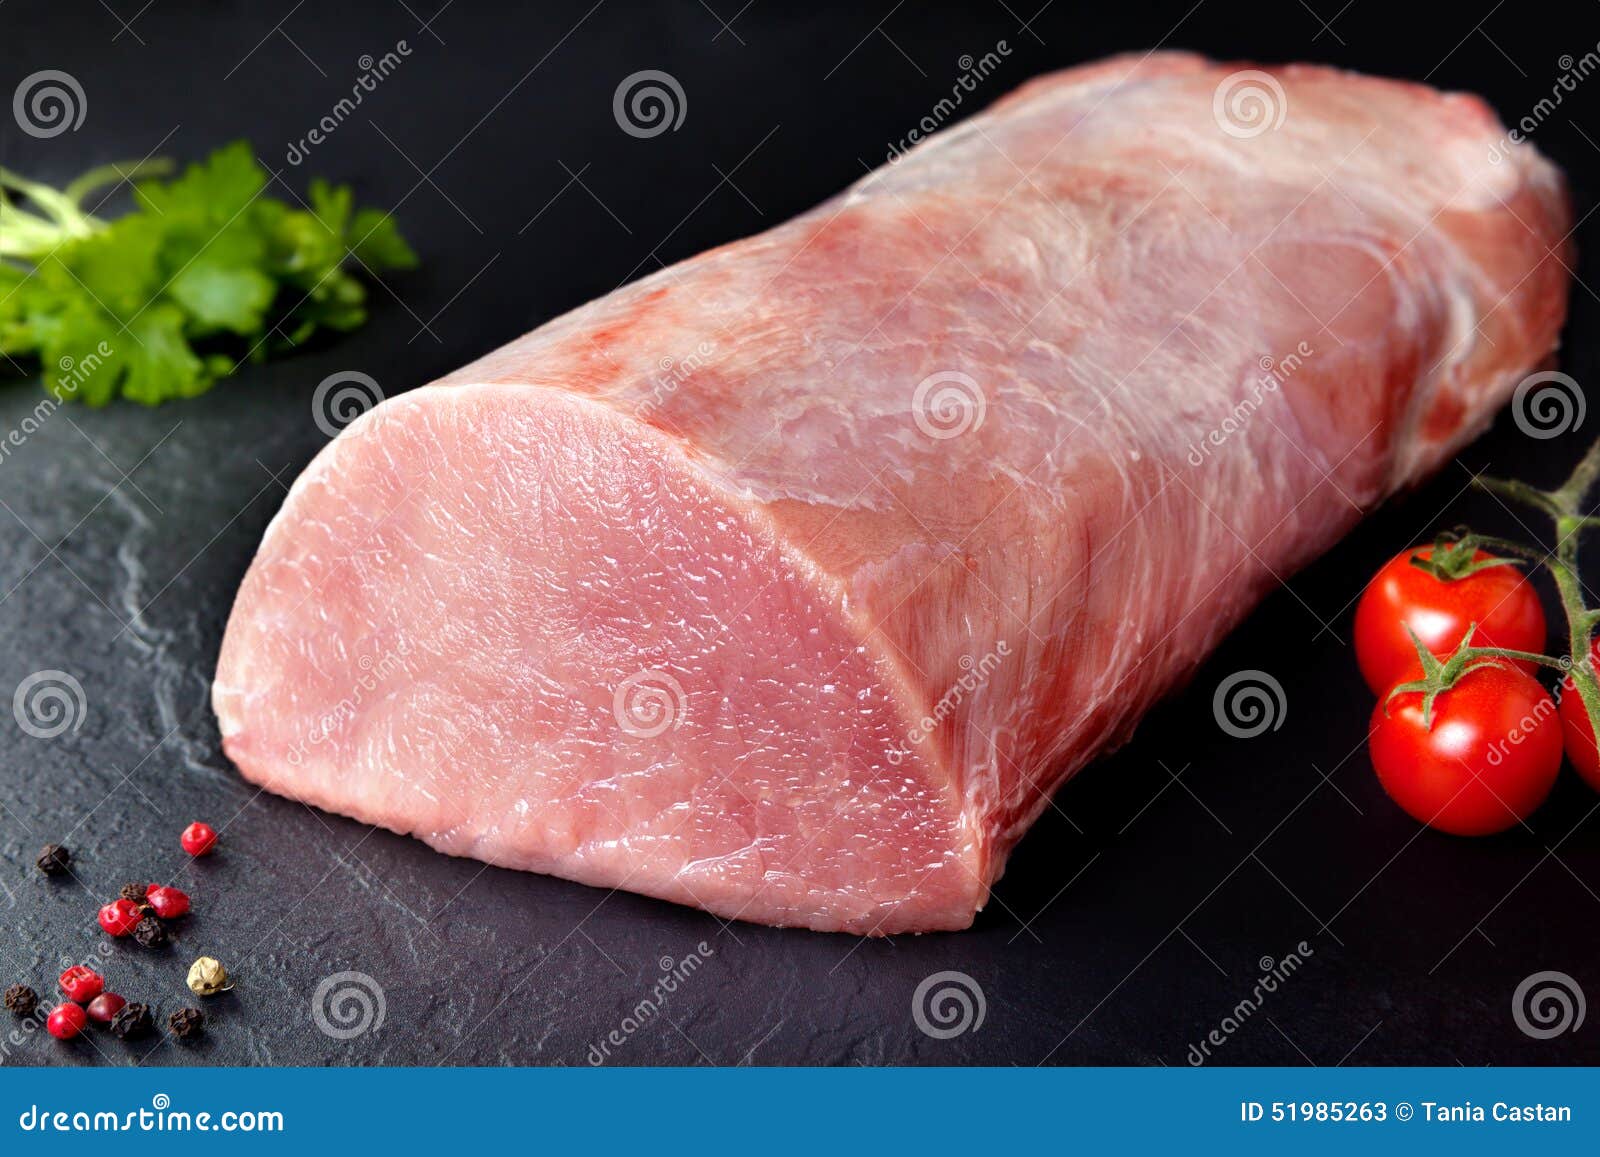 raw meat and fresh pork. roll uncooked pork, pork loin